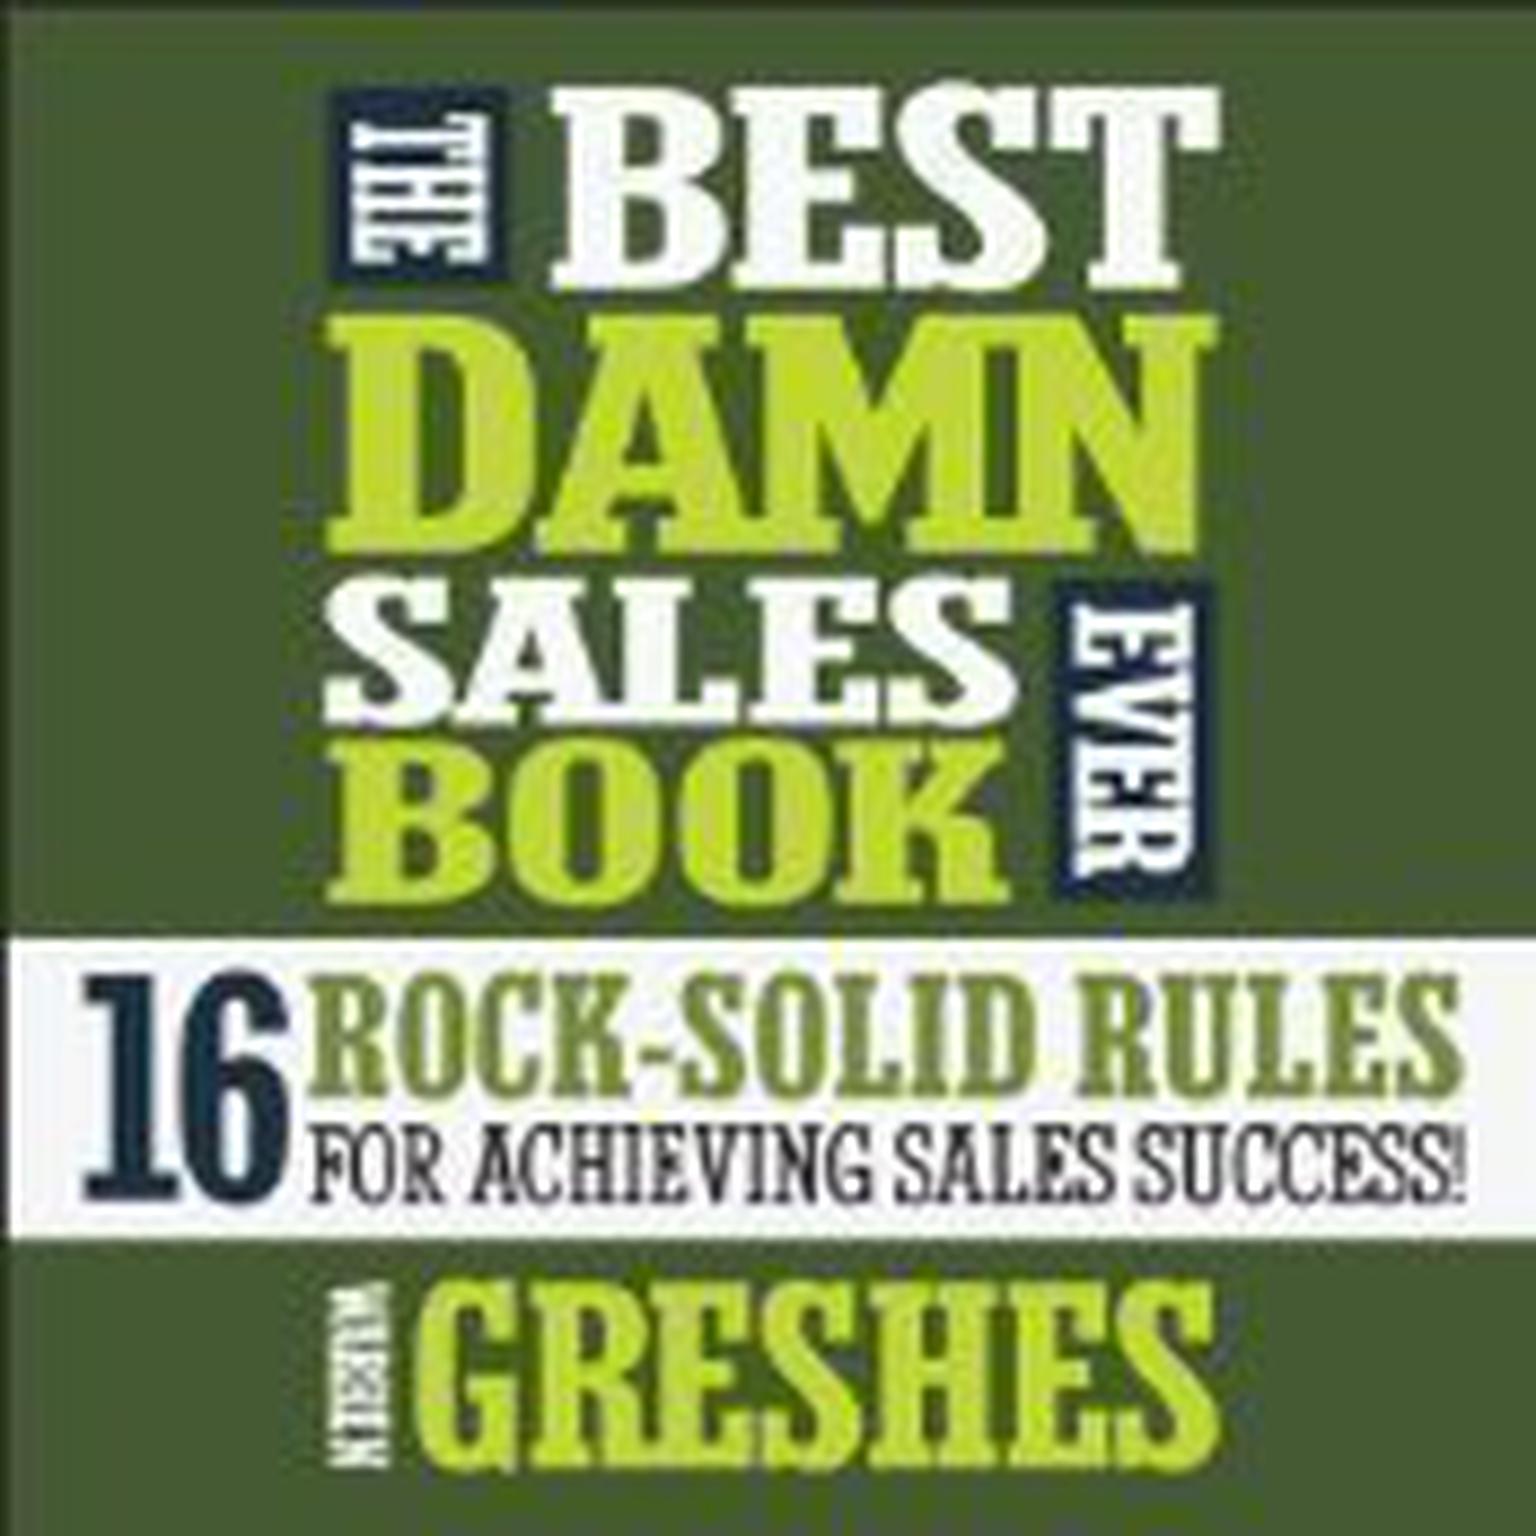 The Best Damn Sales Book Ever: 16 Rock-Solid Rules for Achieving Sales Success! Audiobook, by Warren Greshes